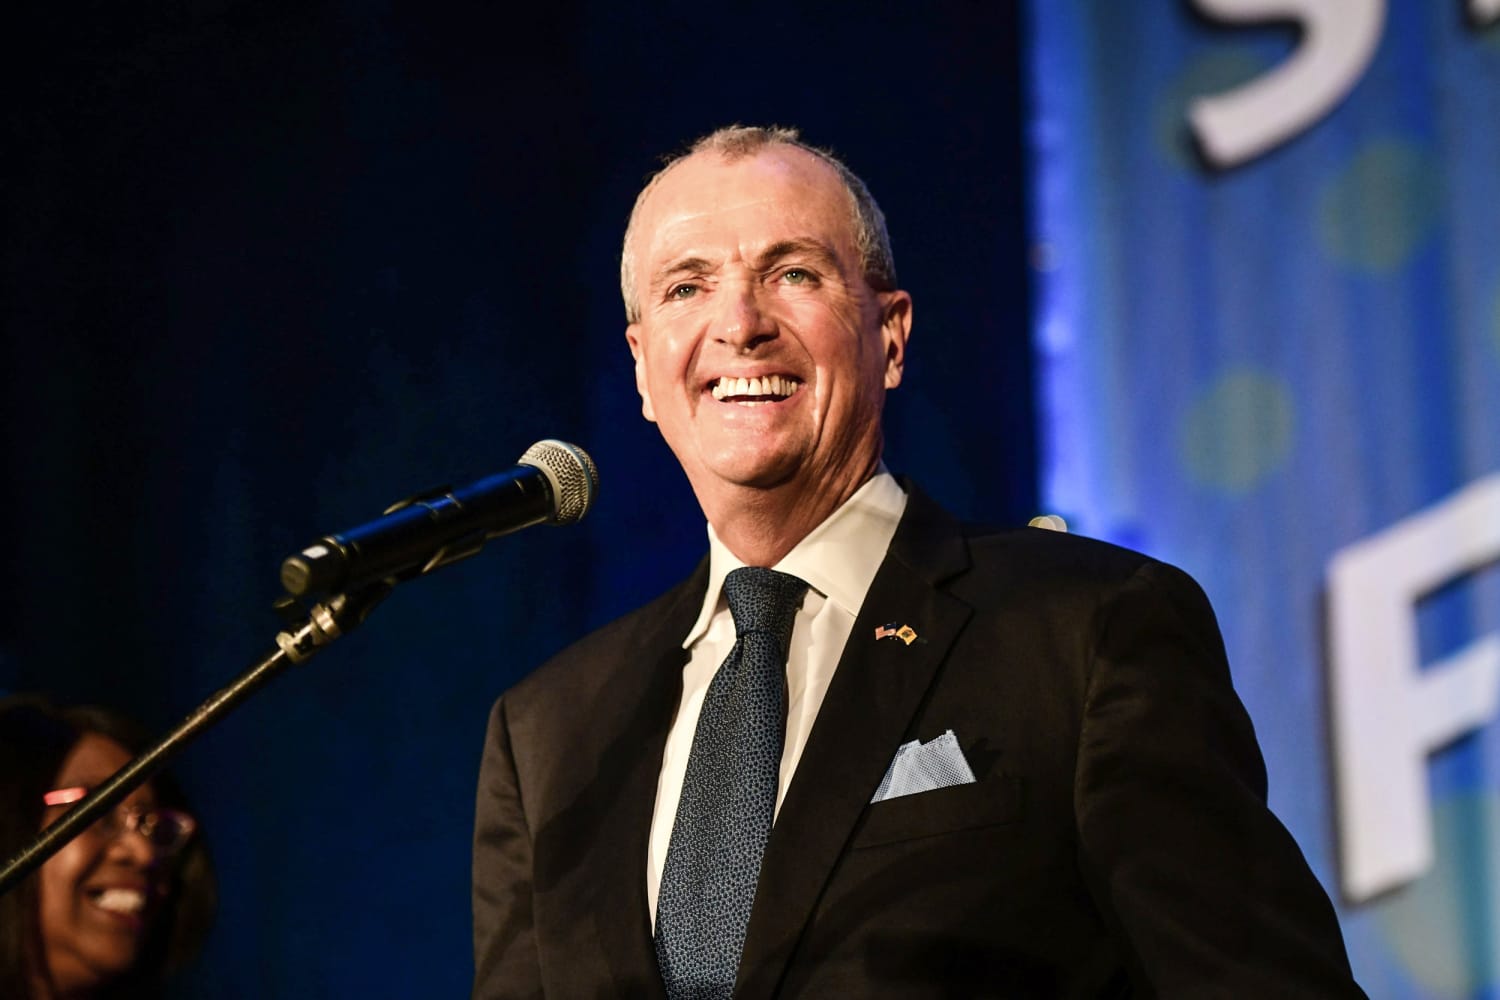 Democratic Gov. Phil Murphy narrowly wins re-election in New Jersey, NBC News projects